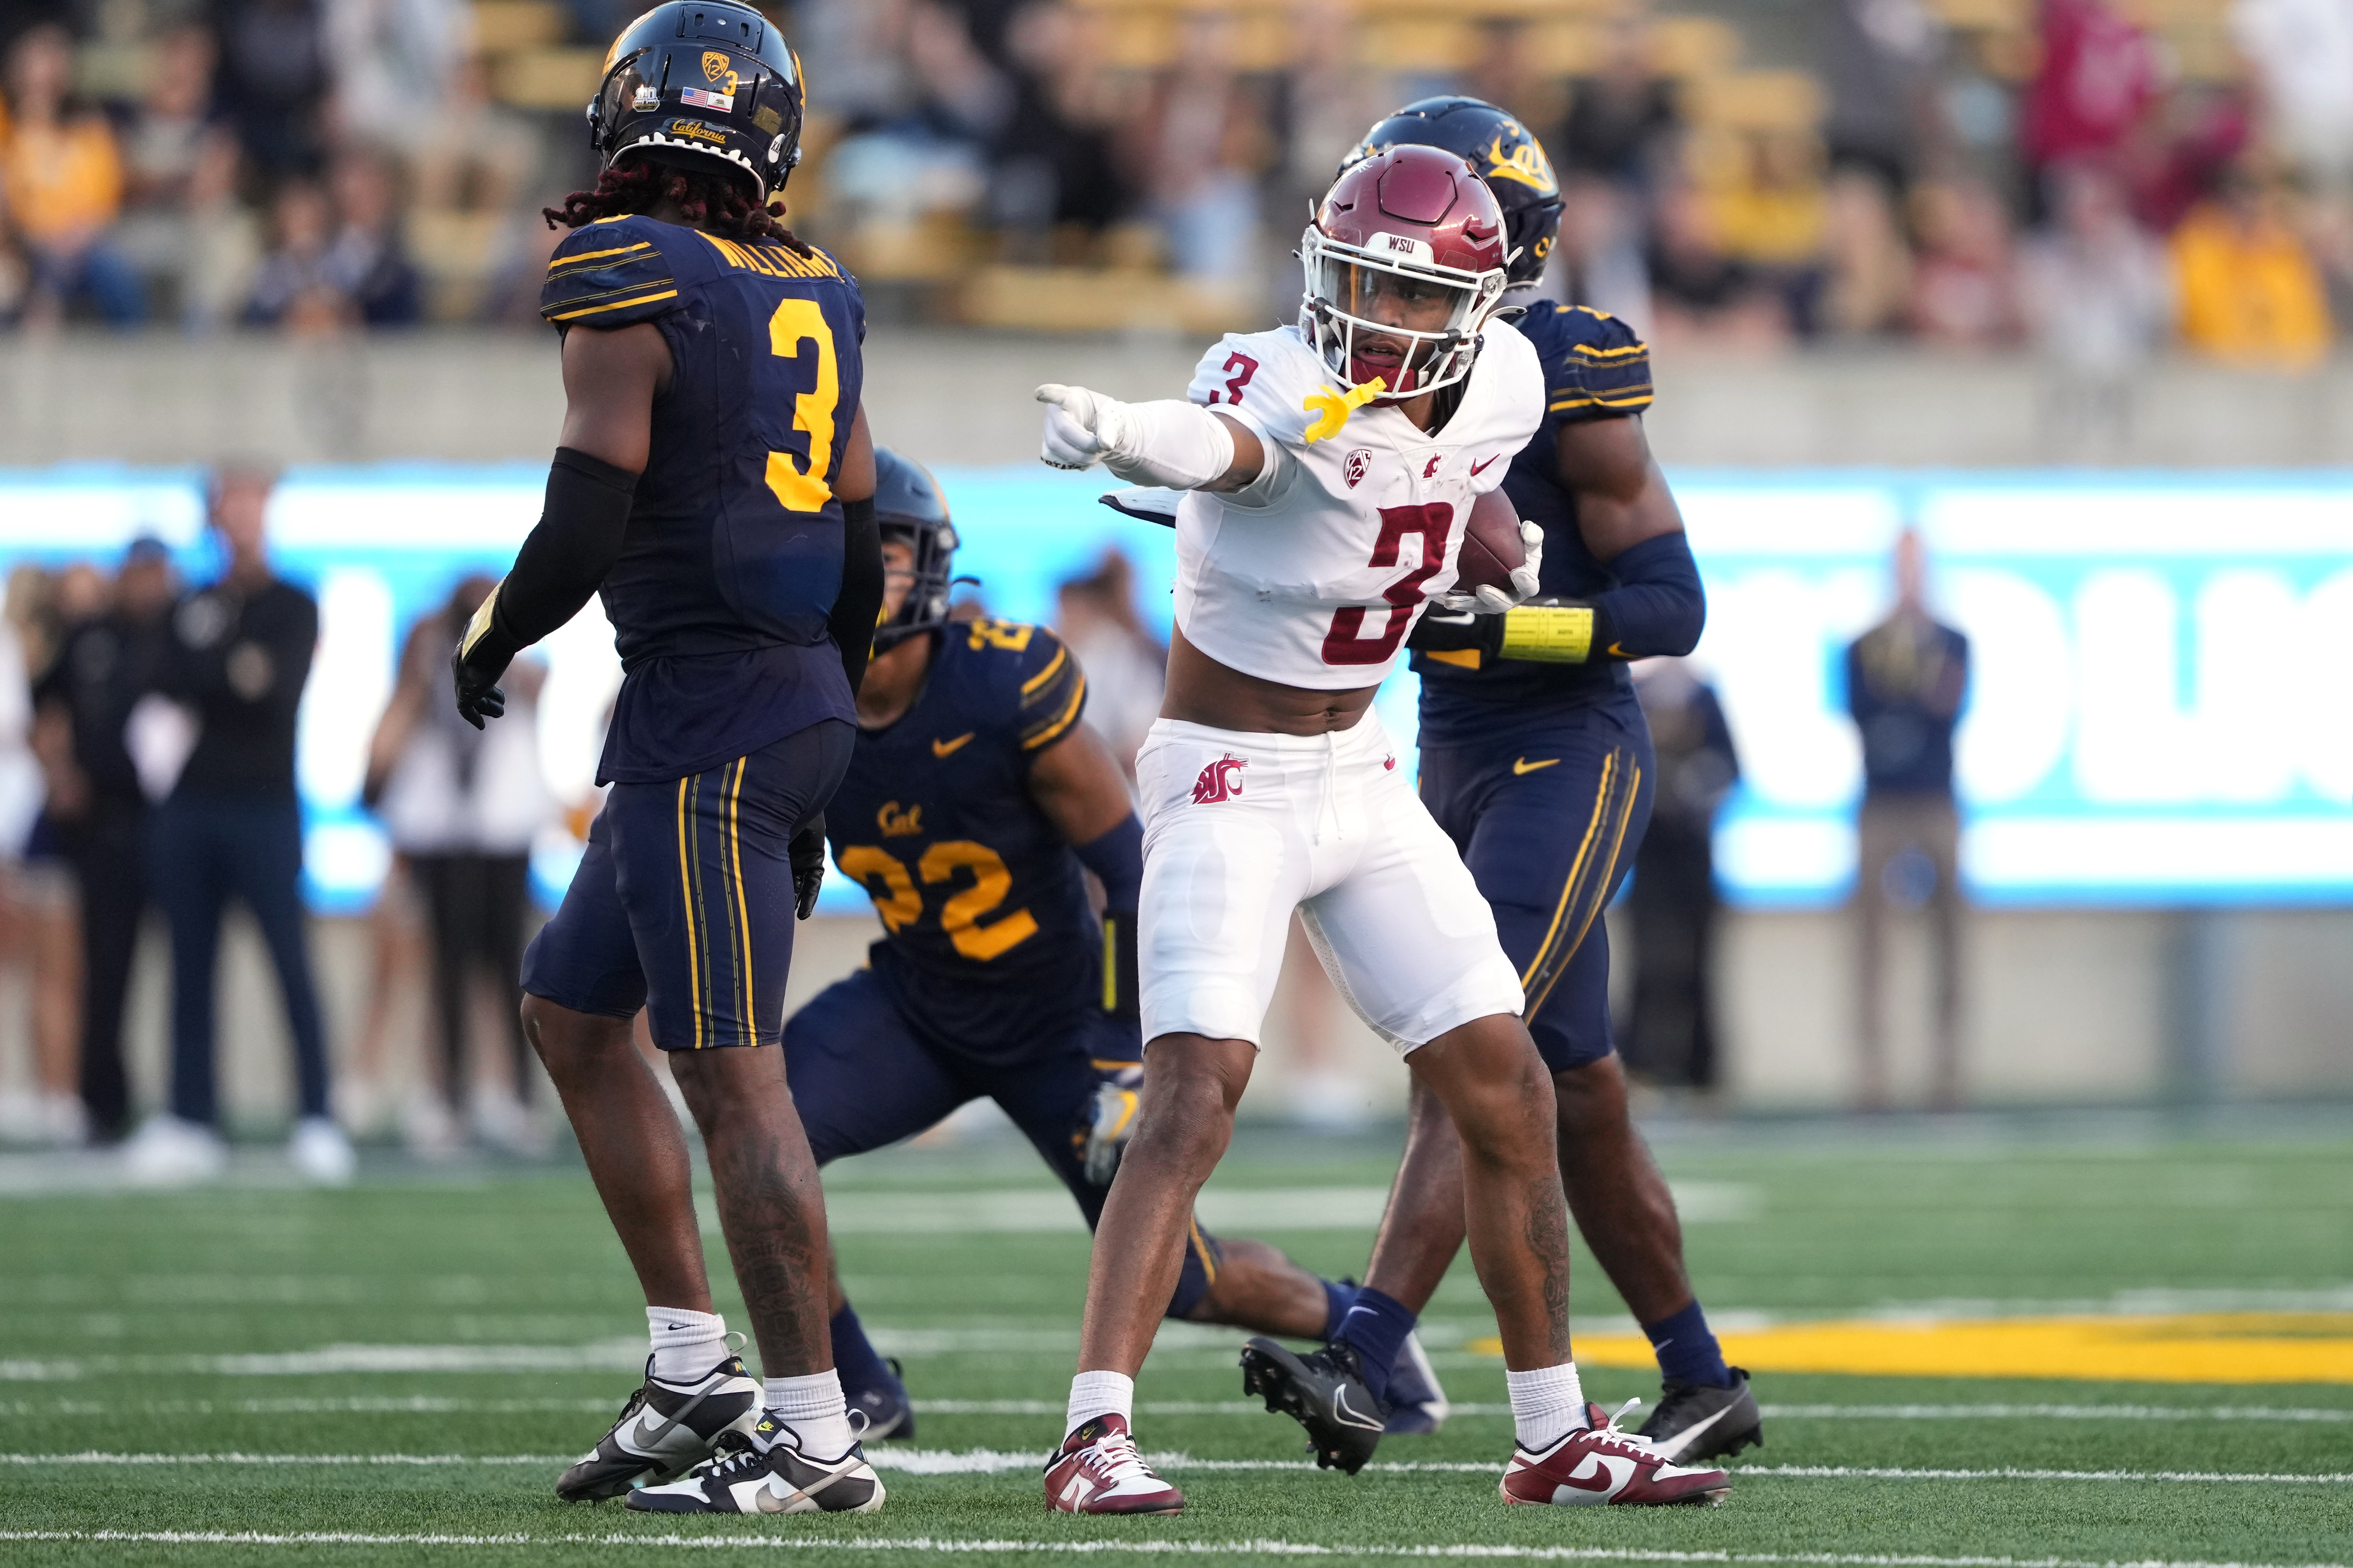 Nov 11, 2023; Berkeley, California, USA; Washington State Cougars wide receiver Josh Kelly (3) gestures after catching a pass against the California Golden Bears during the fourth quarter at California Memorial Stadium. Mandatory Credit: Darren Yamashita-USA TODAY Sports